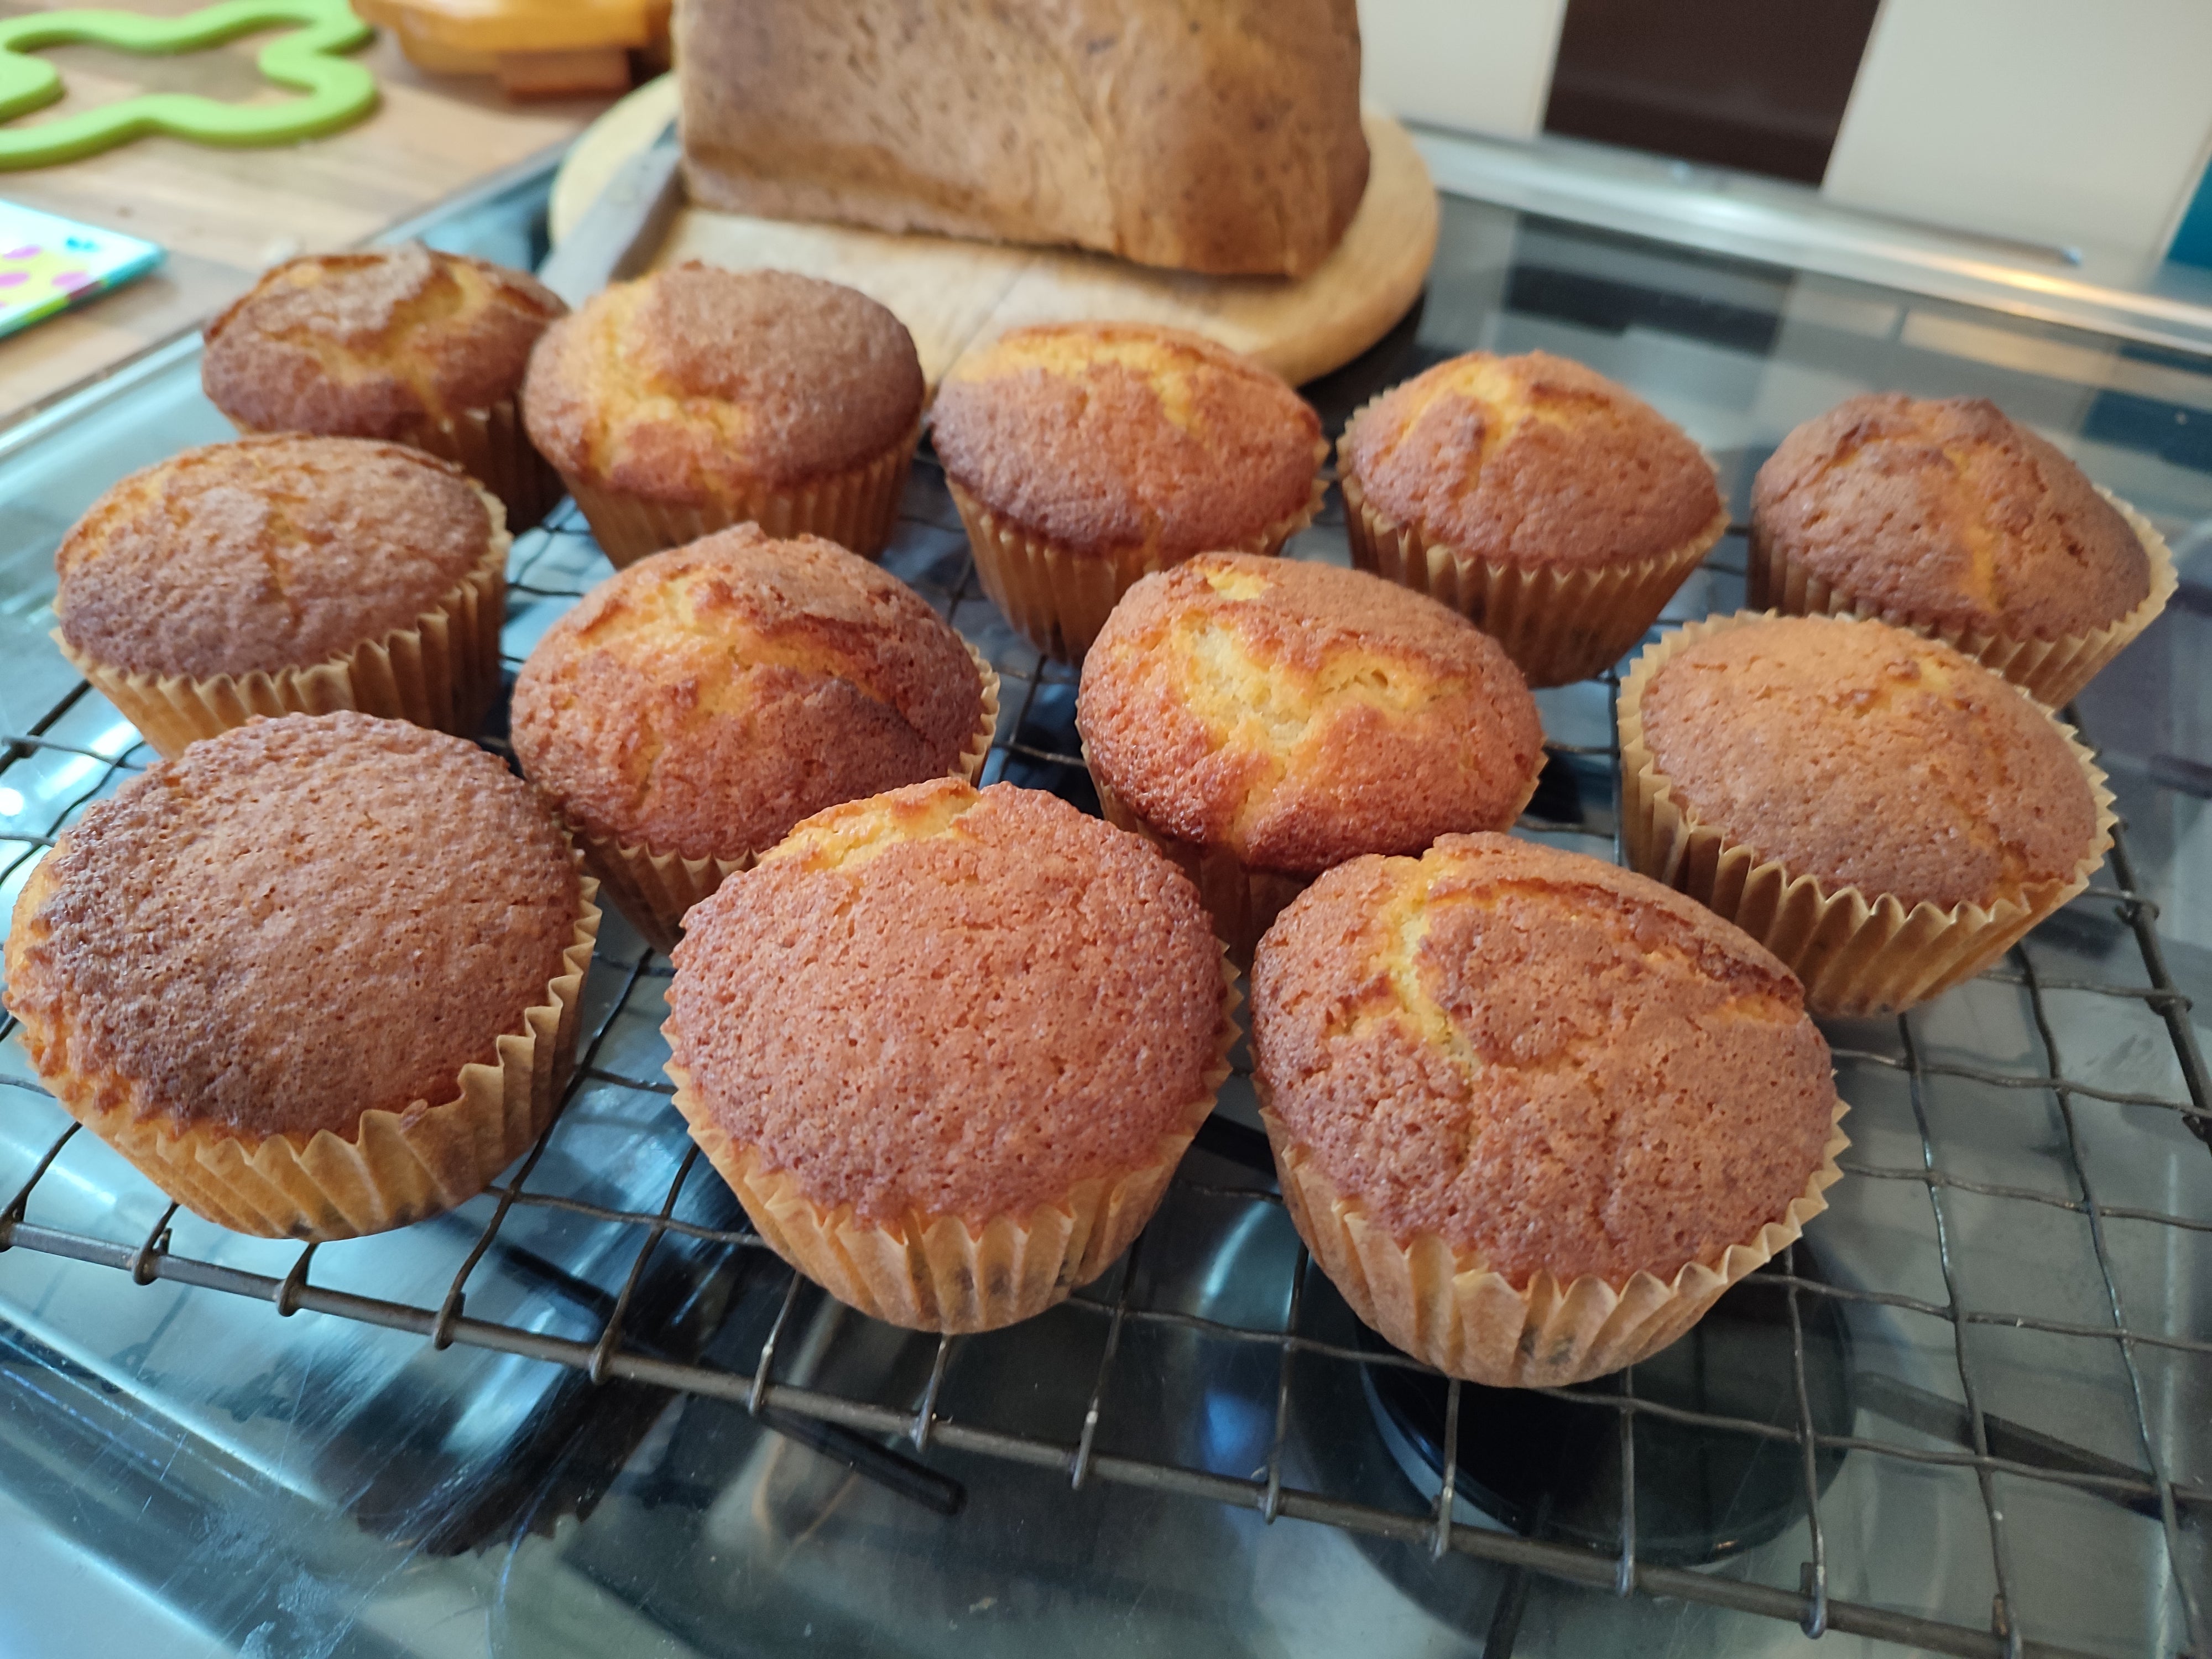 Some of Tess’ delicious homemade cakes (Collect/PA Real Life)